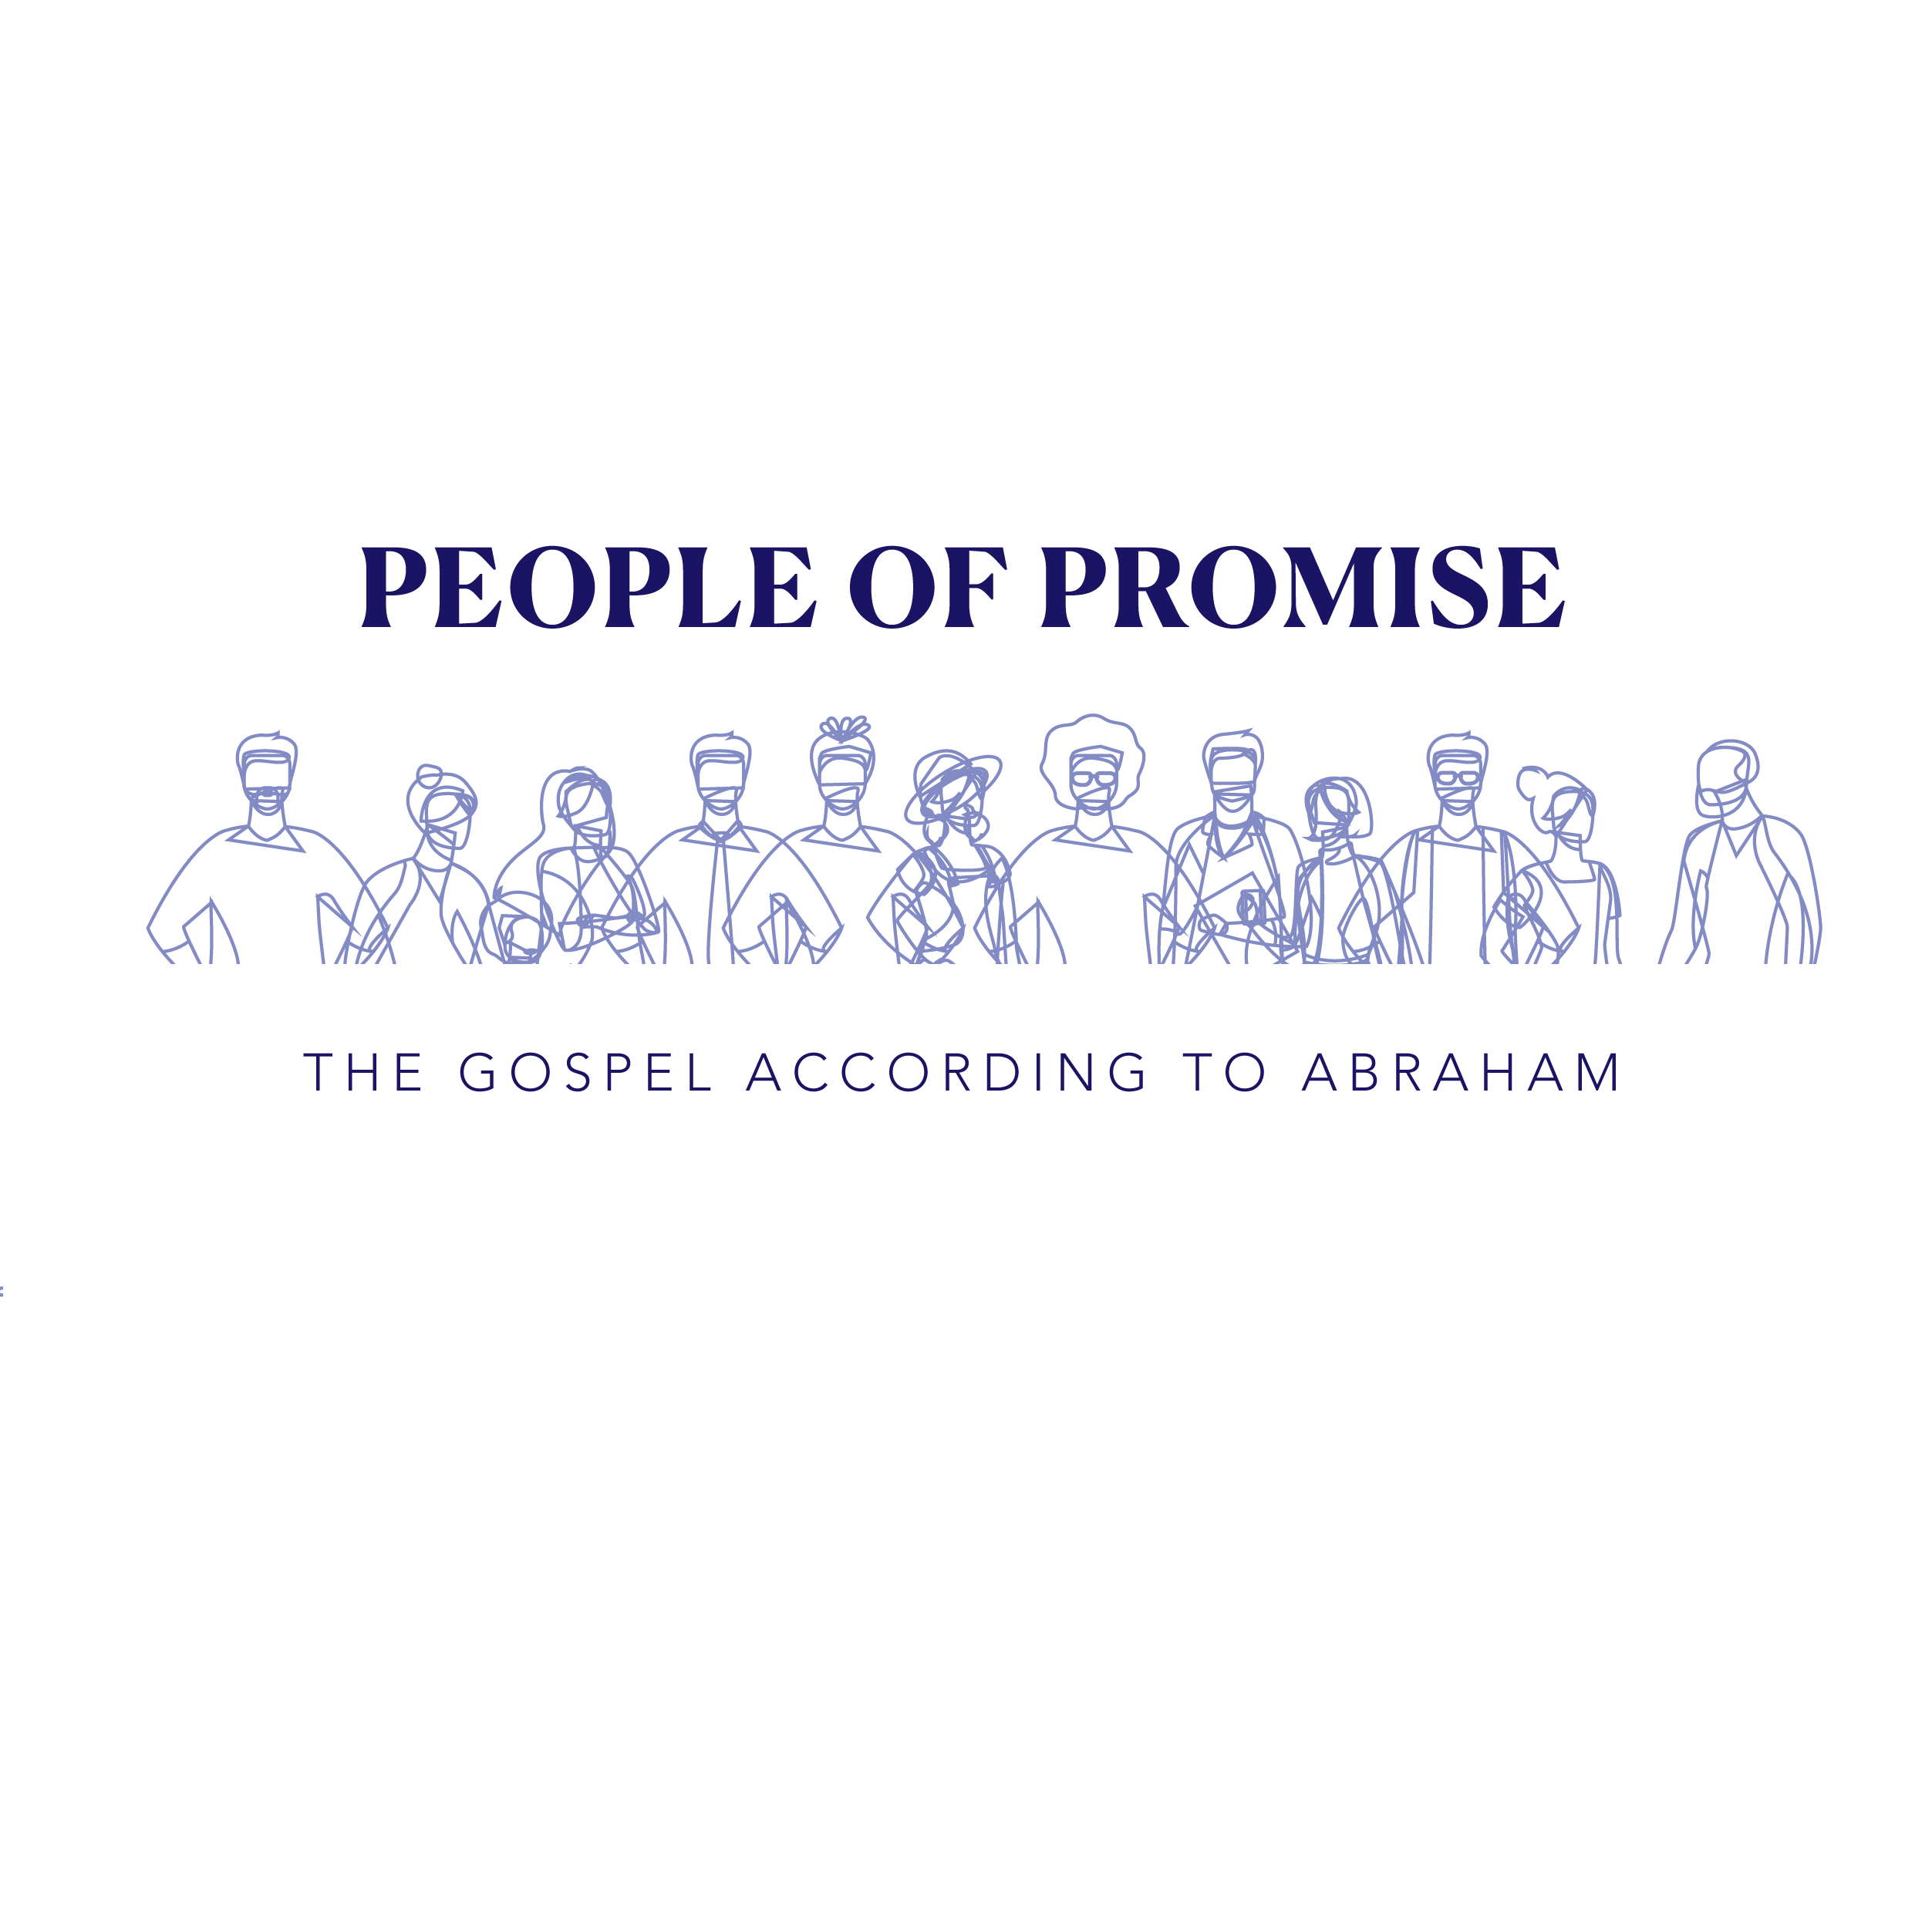 People of Promise: Abraham’s Call